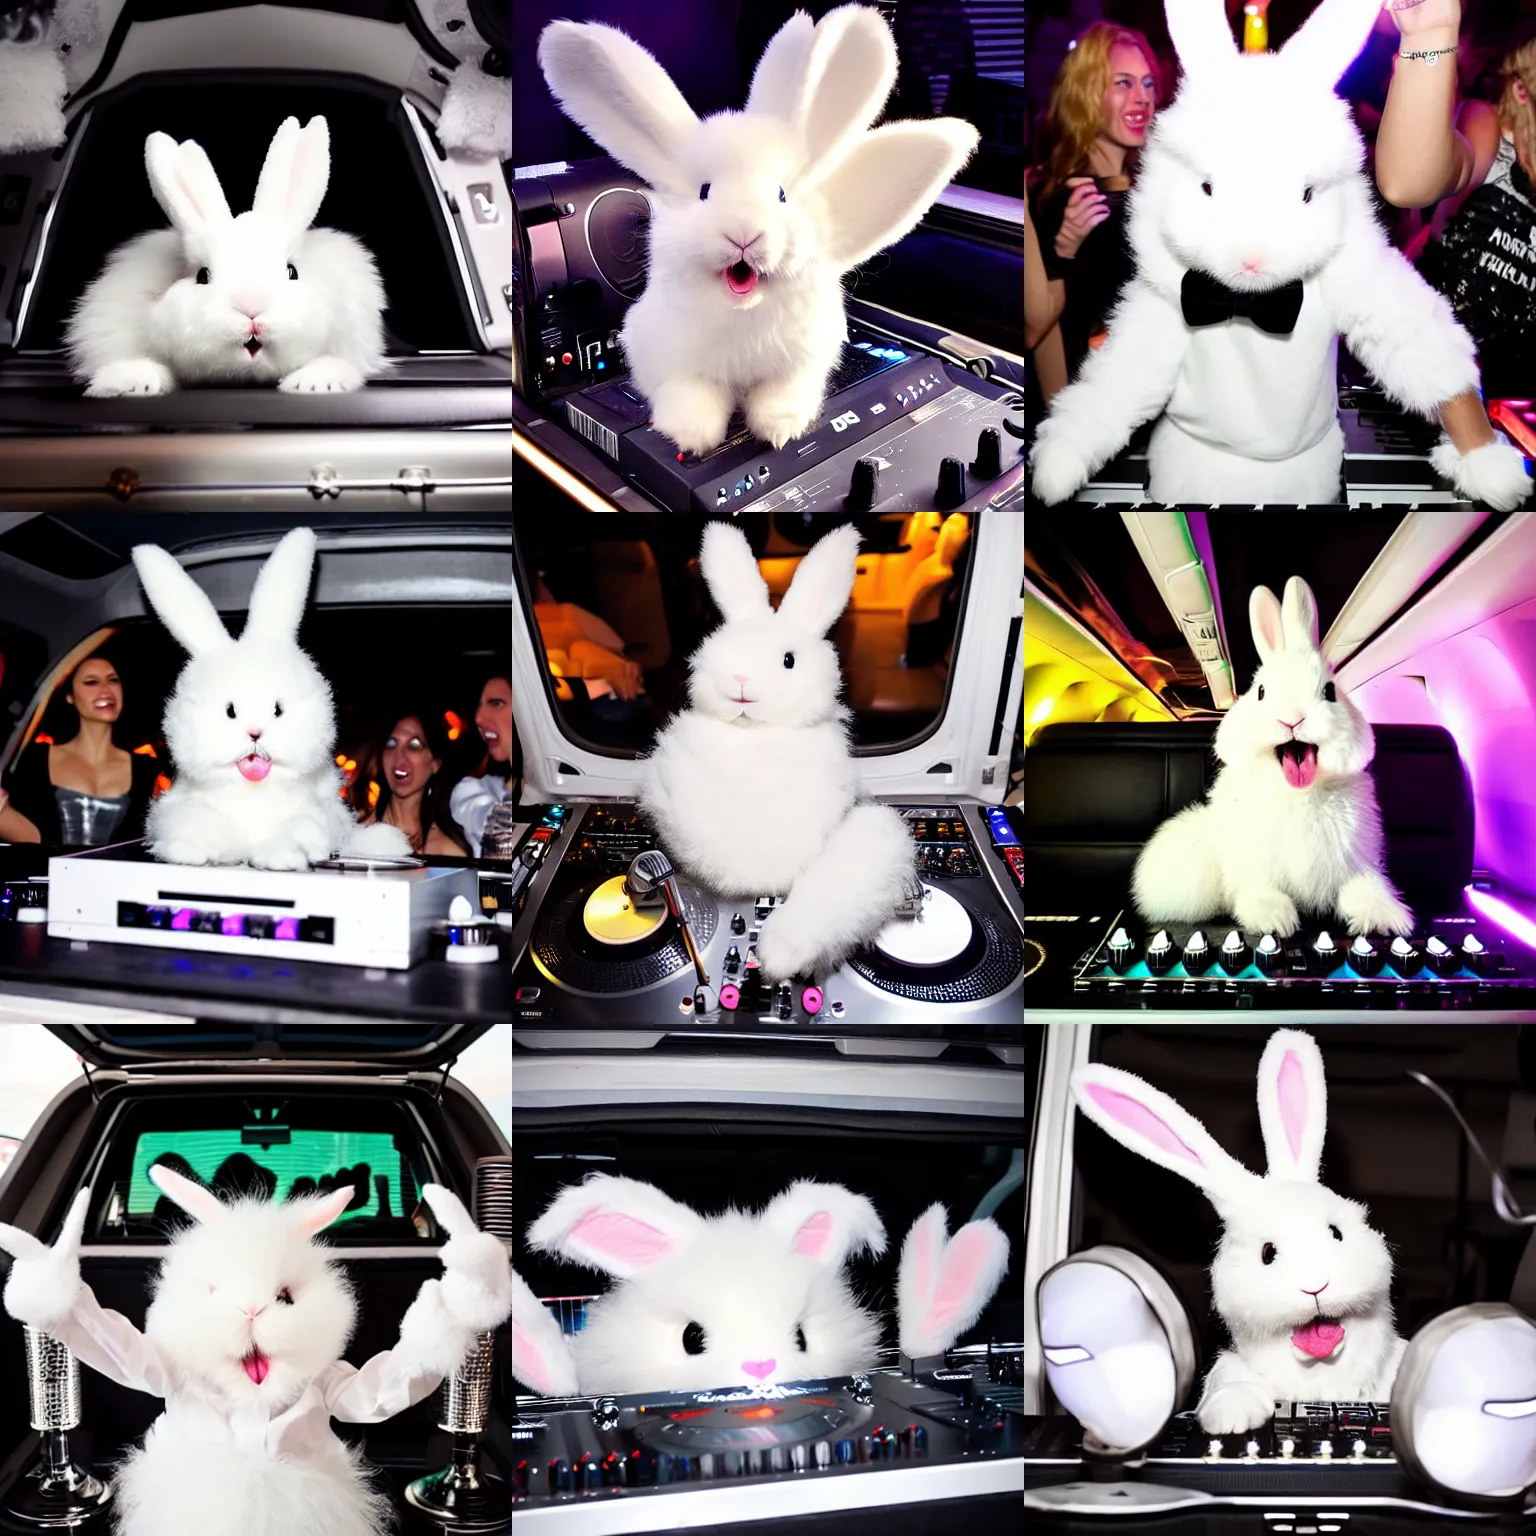 Prompt: super cute fluffy white bunny rabbit screaming in the back of a limo DJing with DJ turntables, photoreal